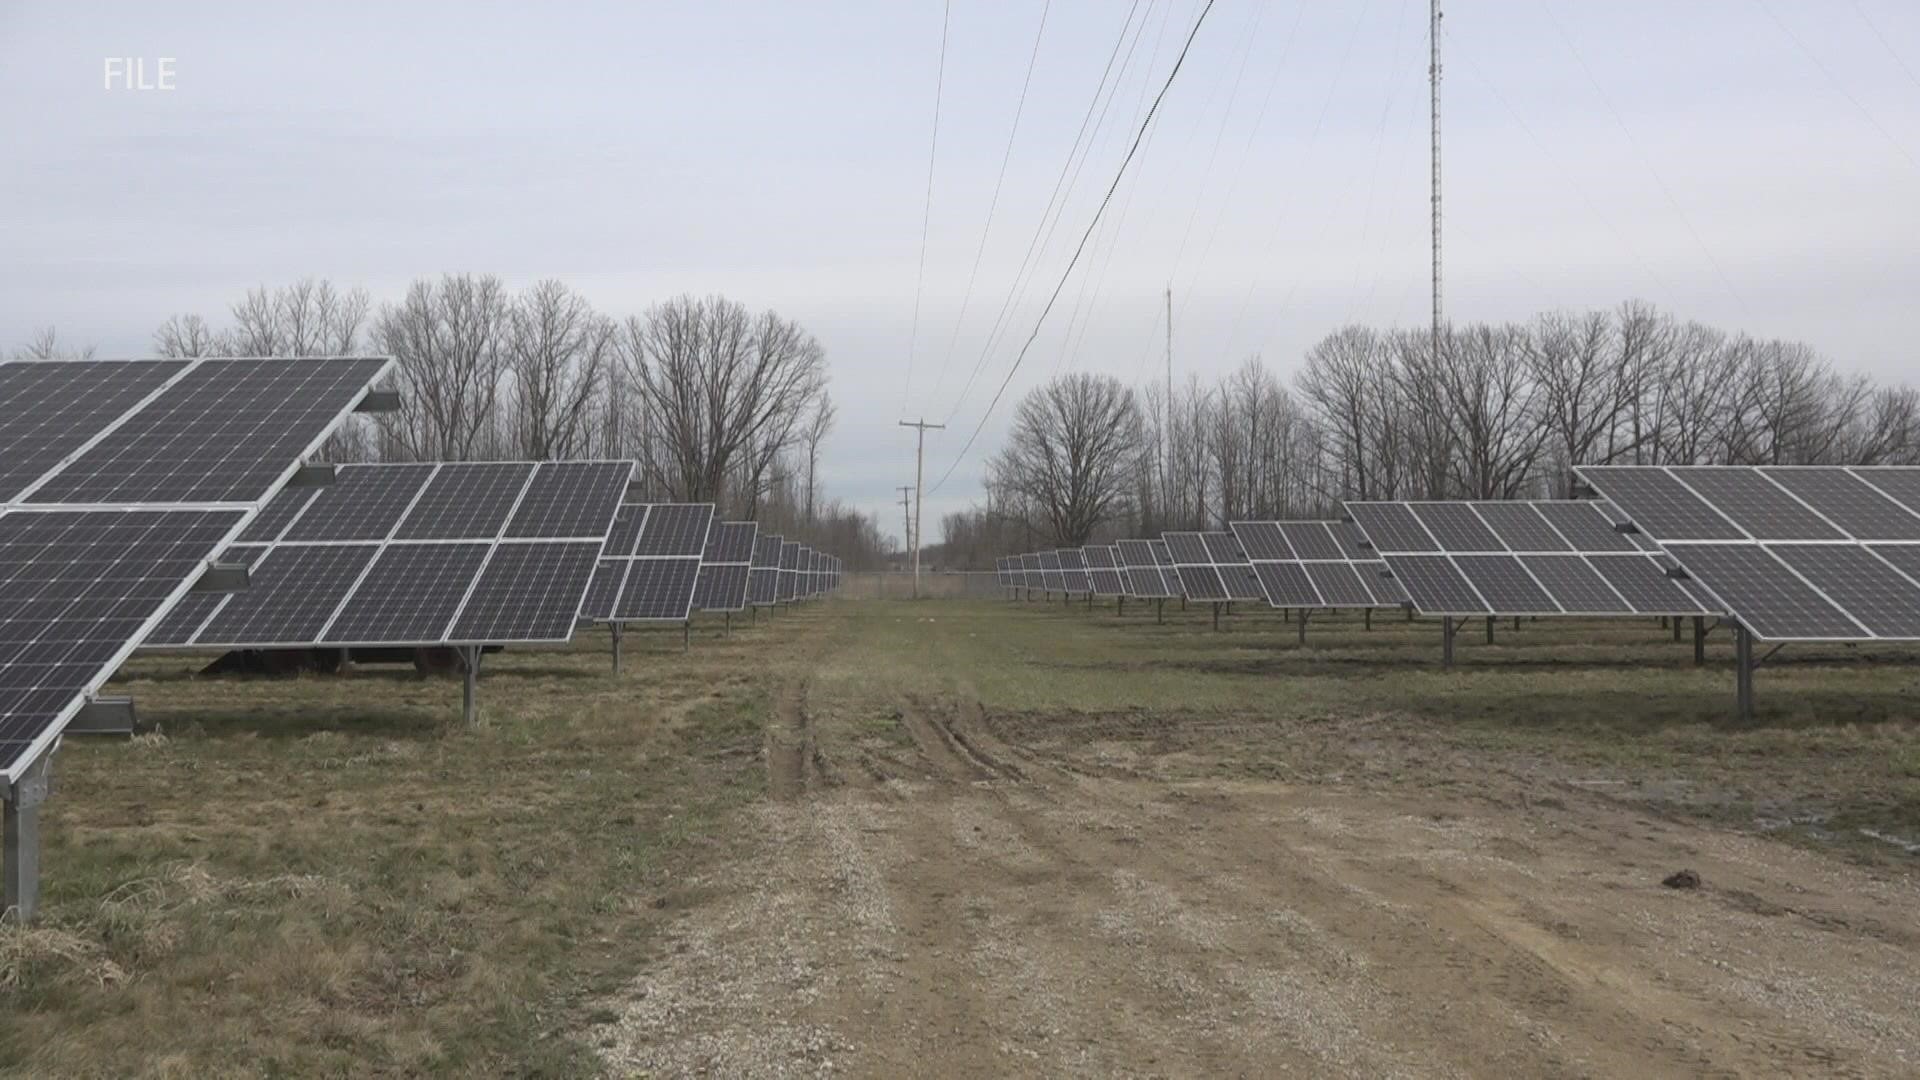 Customers have the ability to invest in the burgeoning green energy sector via the MI Community Solar campaign.